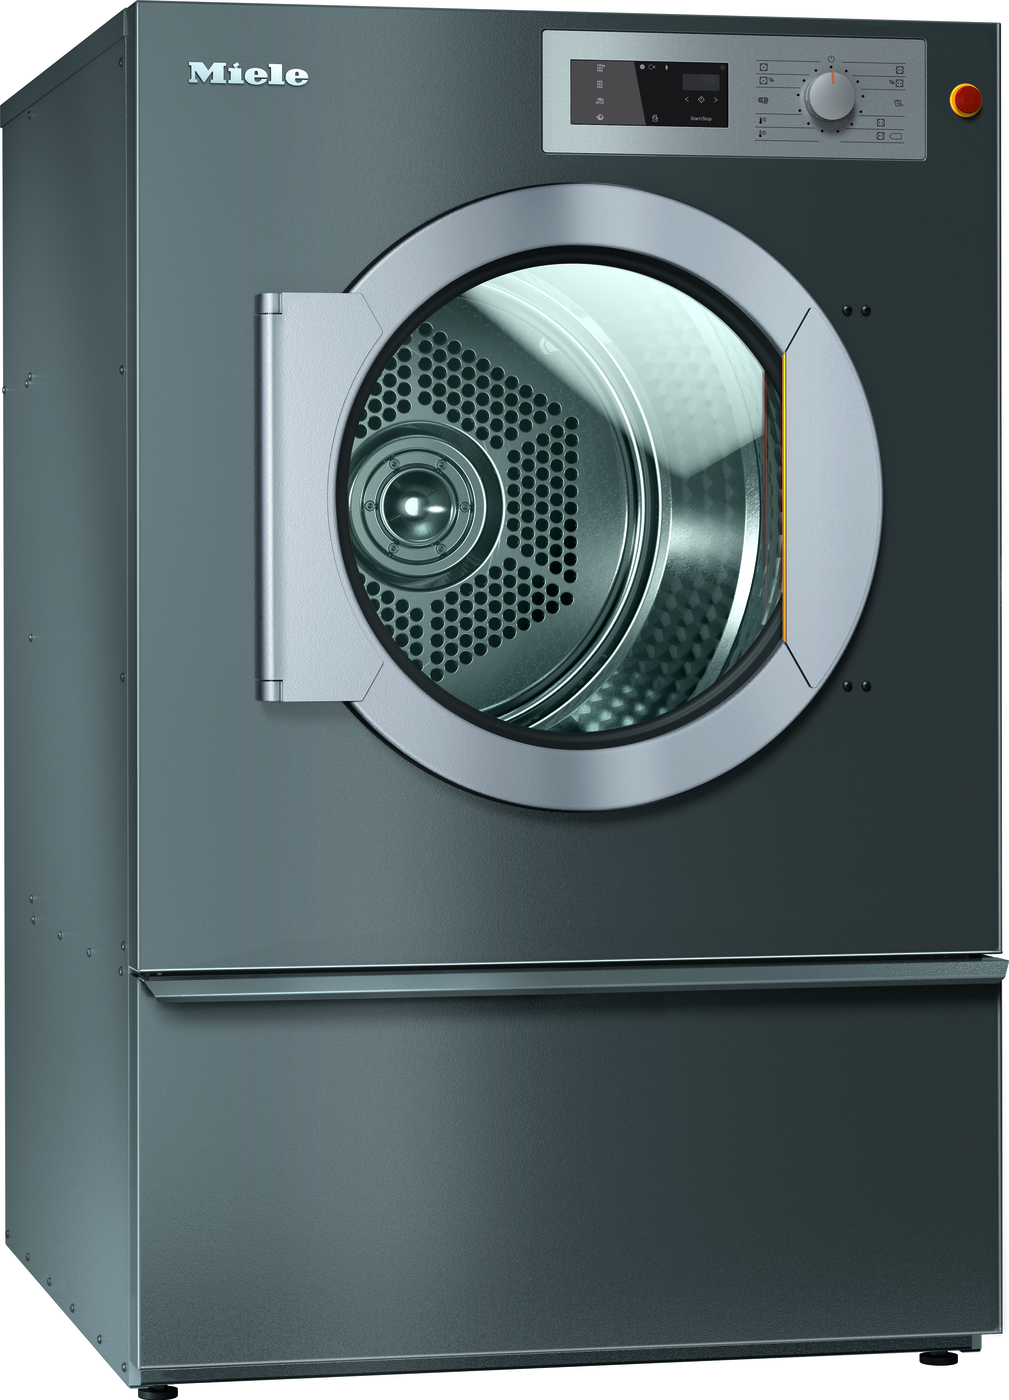 Miele PDR522 Tumble Dryer 2